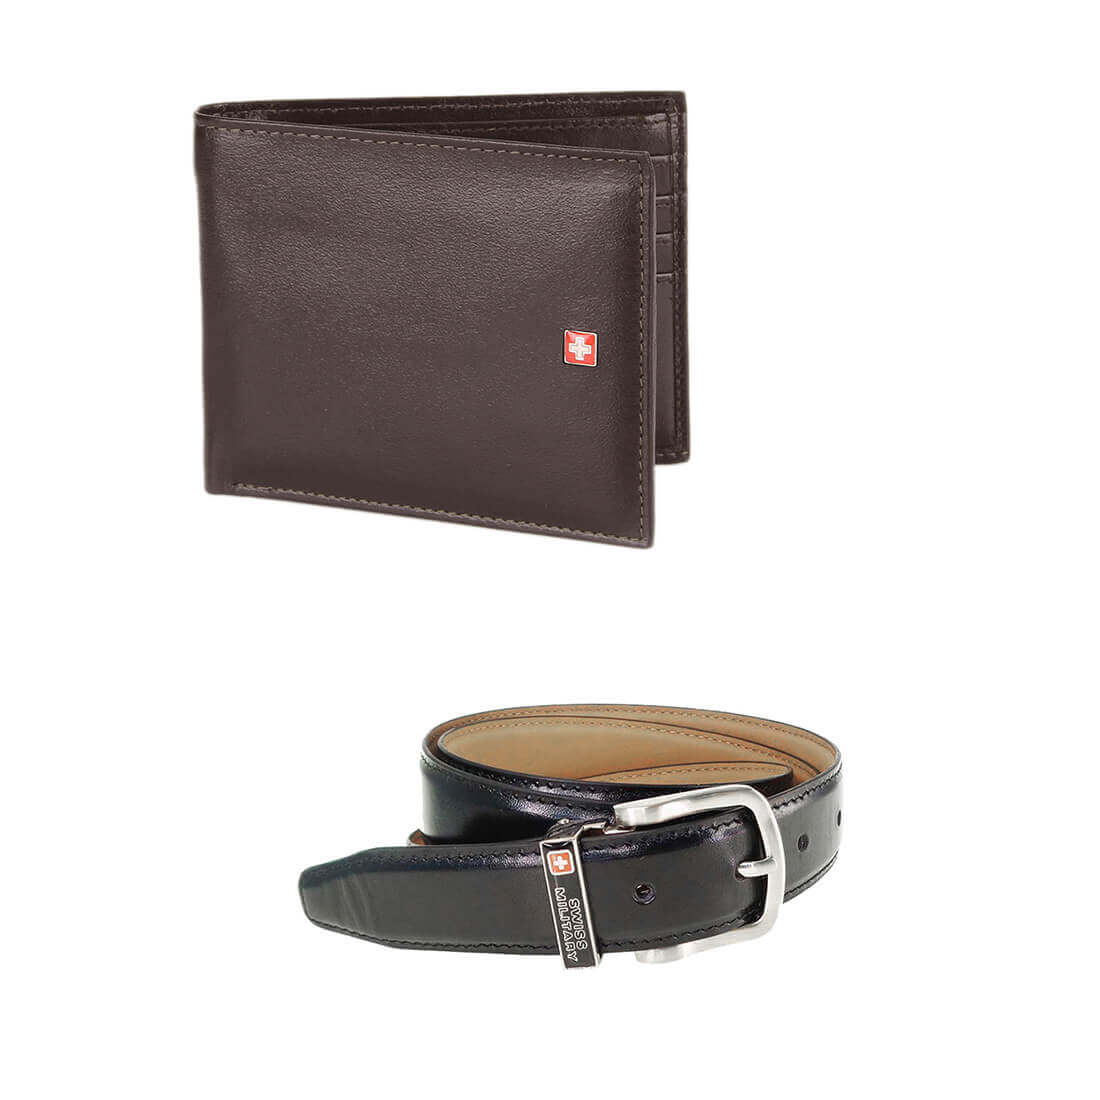 Gift Set of Leather Wallets & Leather Belts Combo Pack (LW23+BLT12)